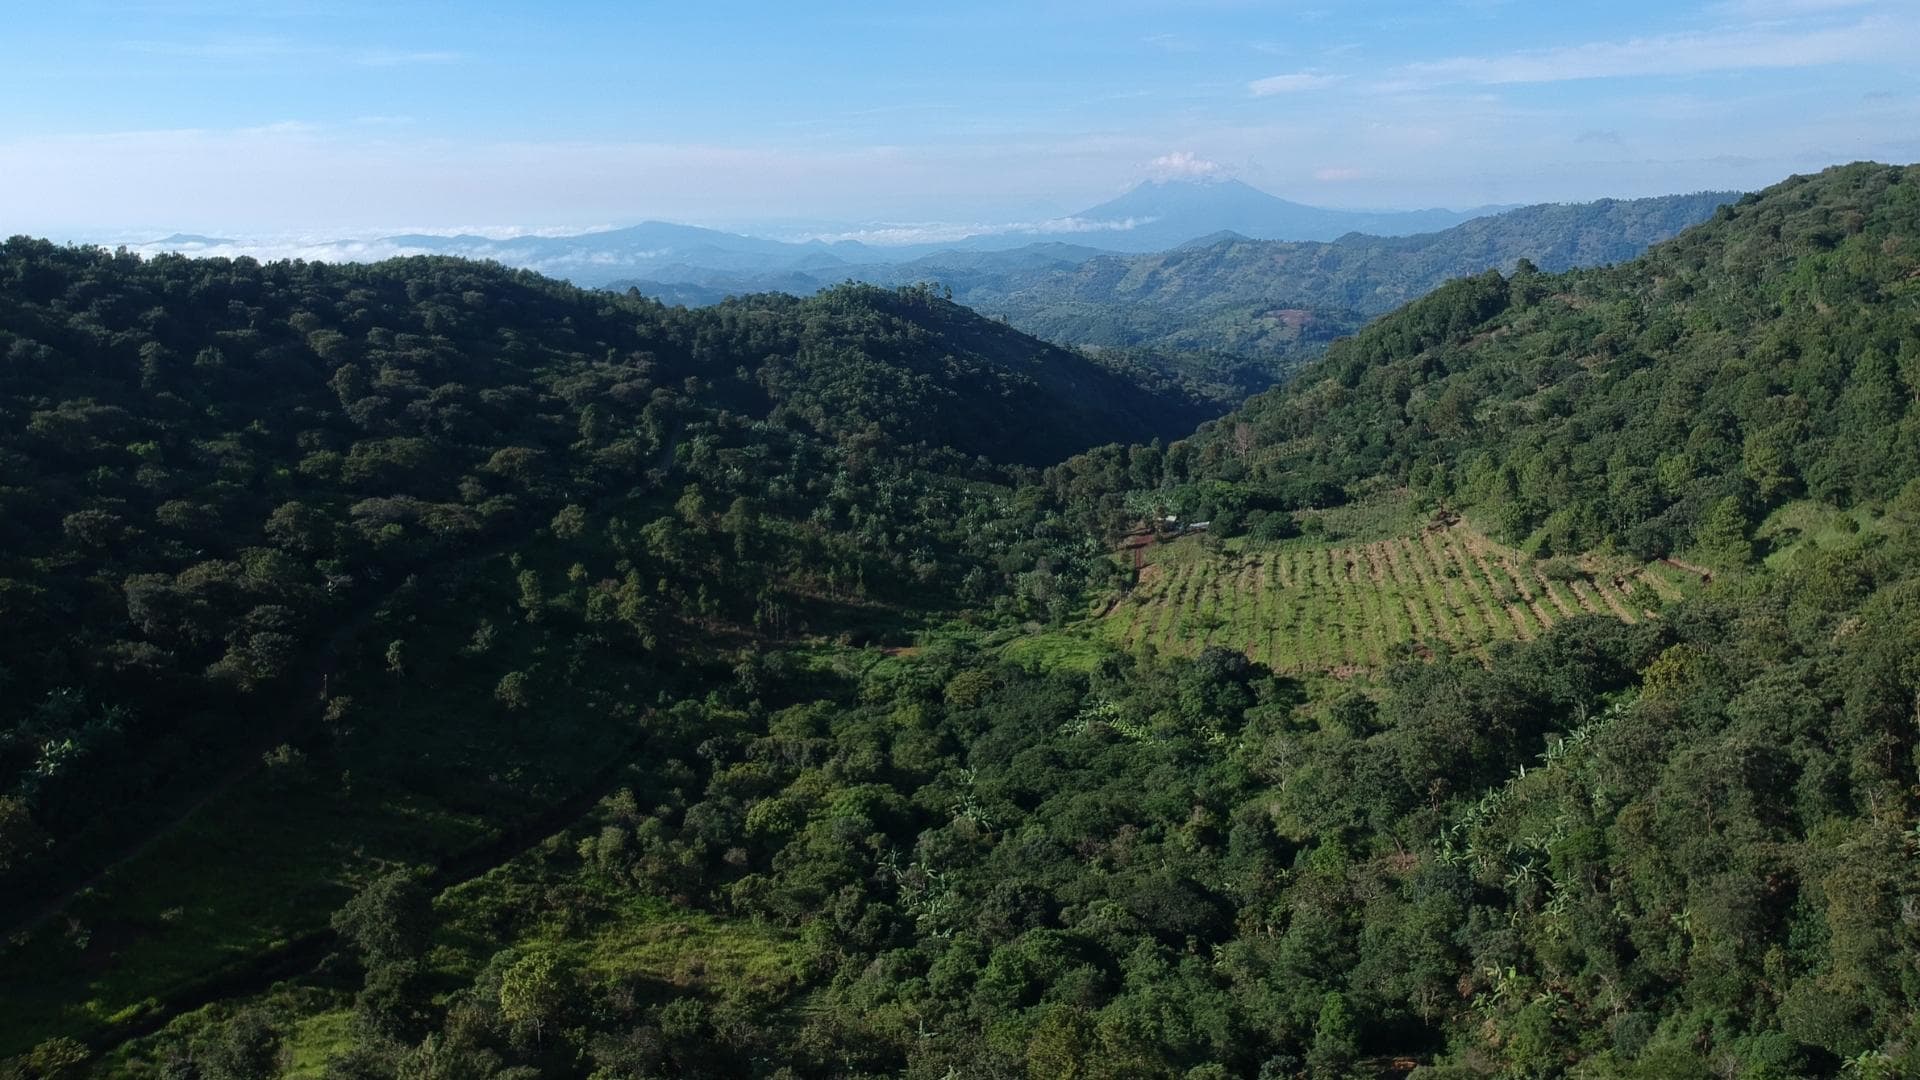 Aerial shot of a coffee farm amidst forest with a volcano behind it